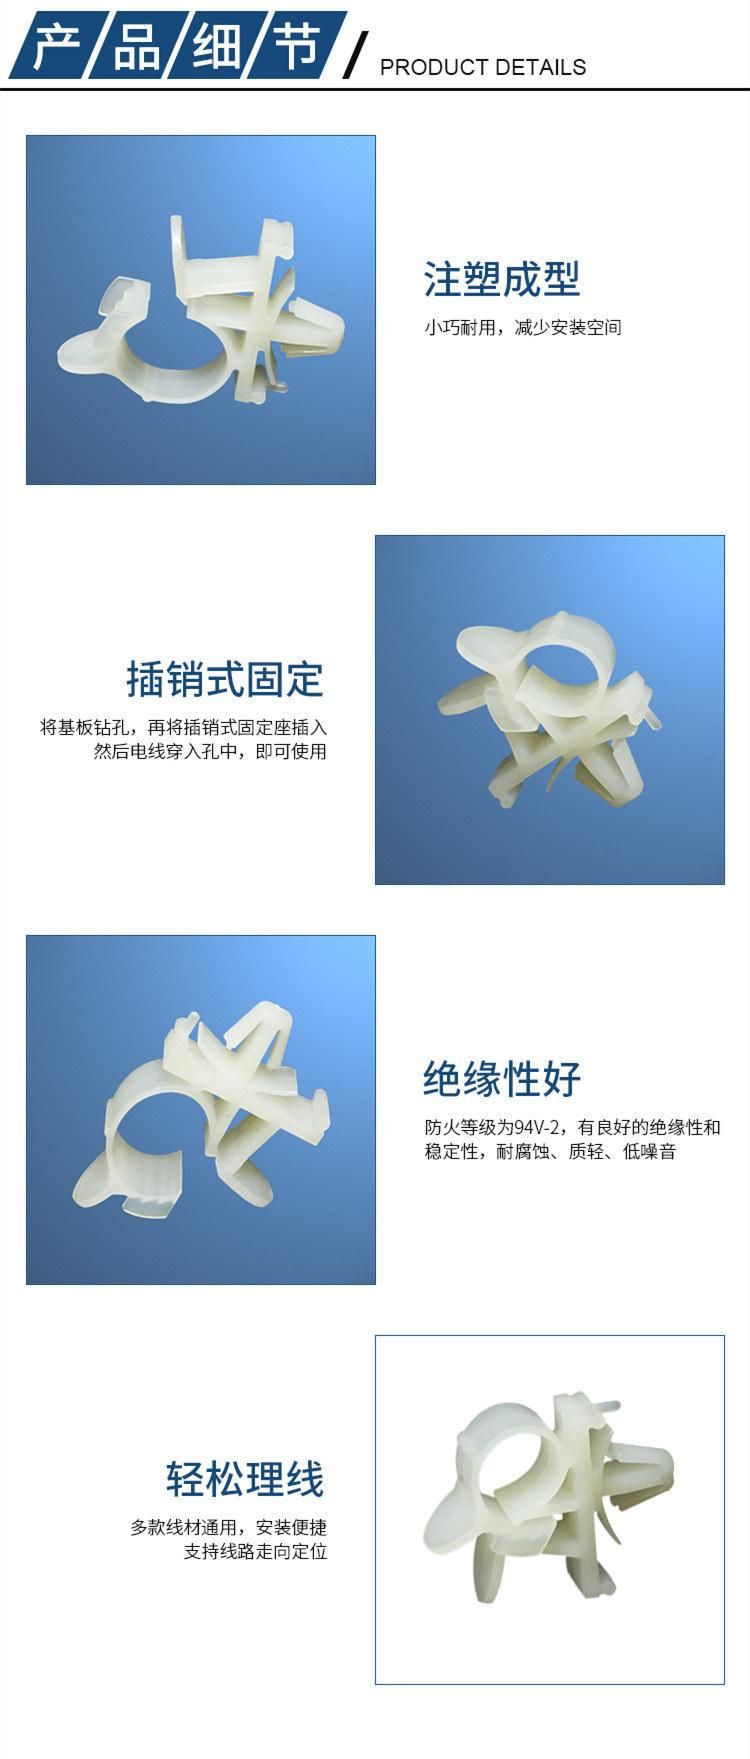 Plastic Cable Fasten Saddle Adjustable Cable Fixing, Heyingcn Plastic Injection Clip Buckle Nylon Cable Clip